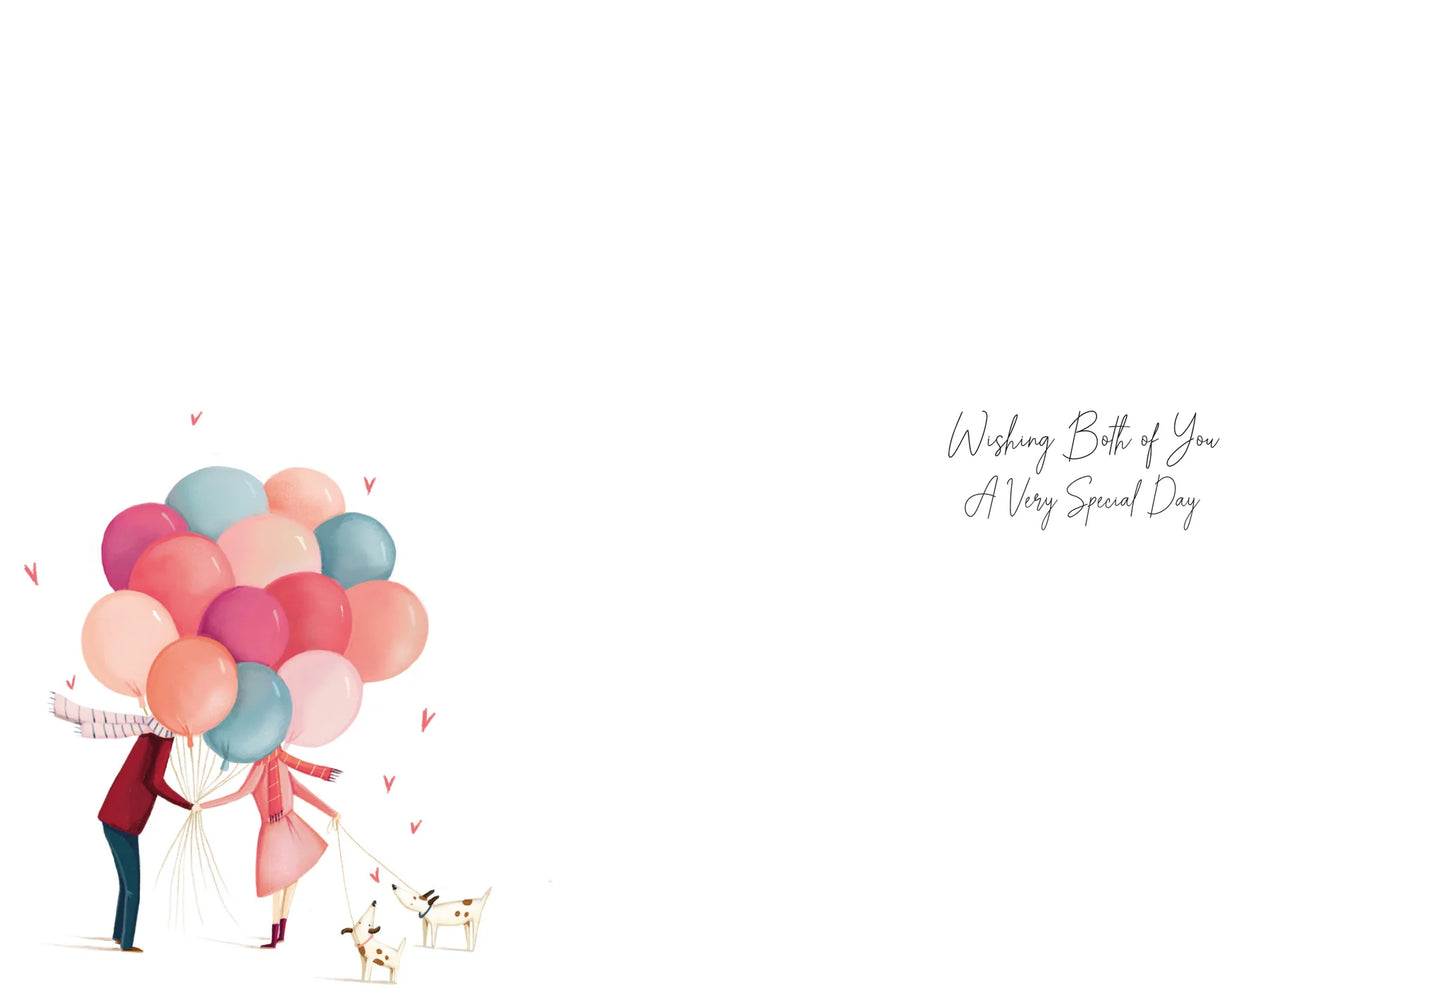 Happy Anniversary Balloons and Dogs Greetings Card (inside)